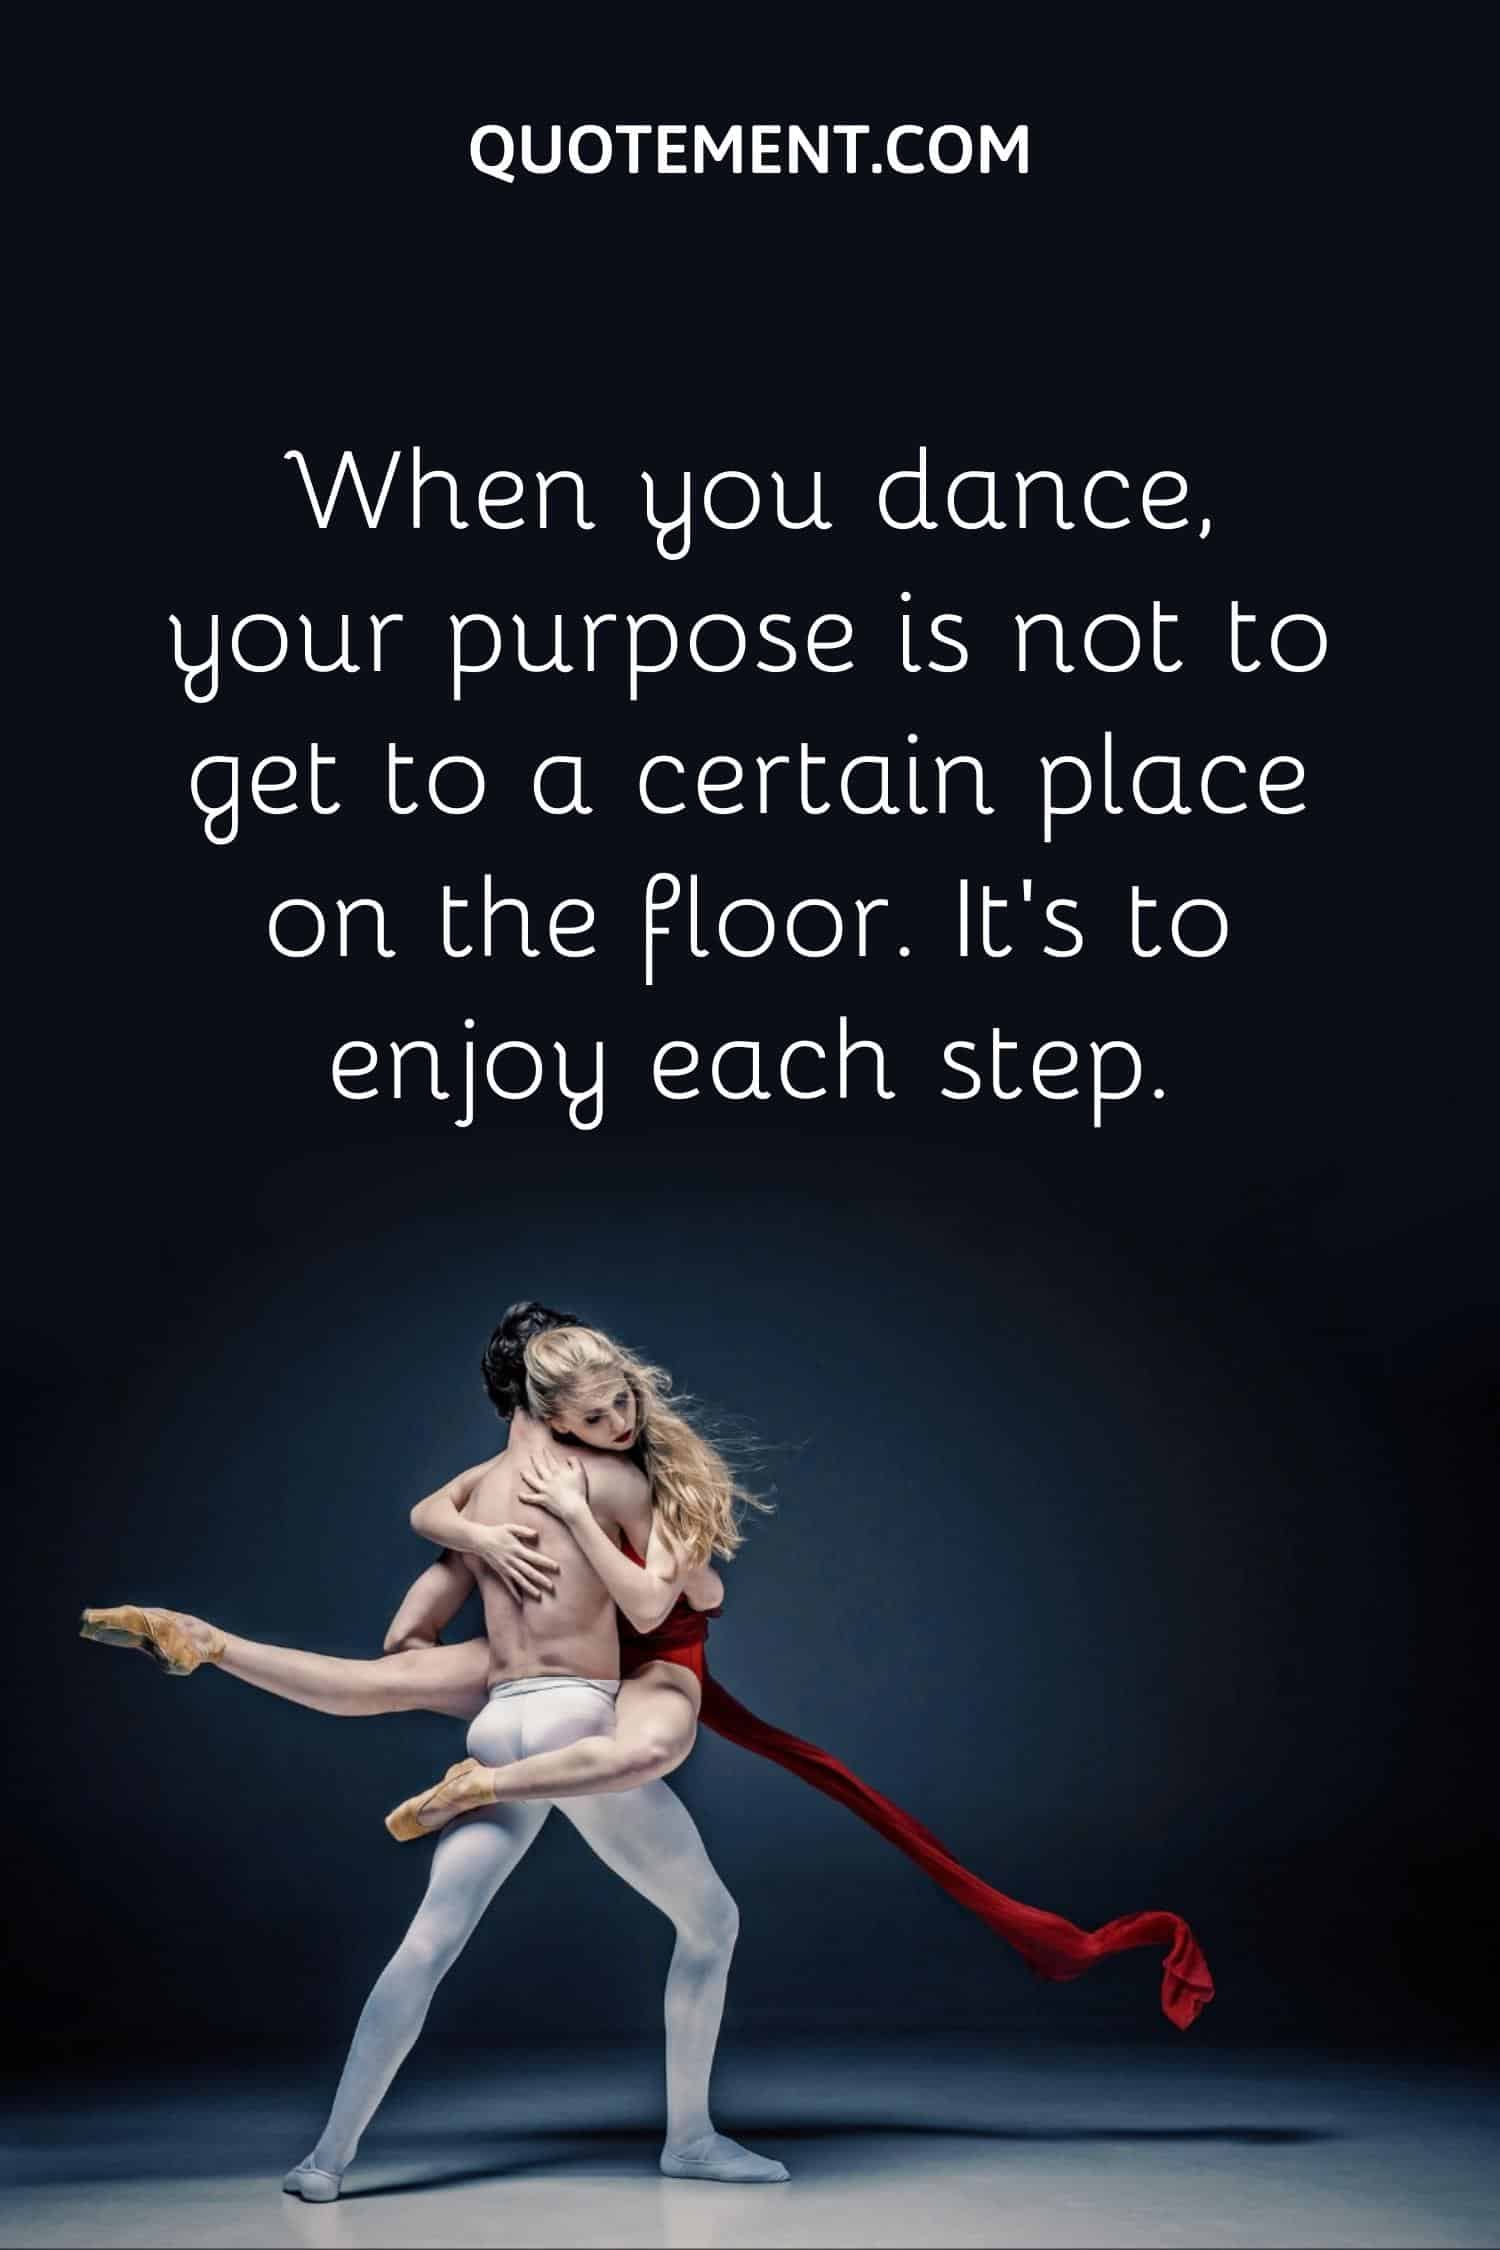 When you dance, your purpose is not to get to a certain place on the floor